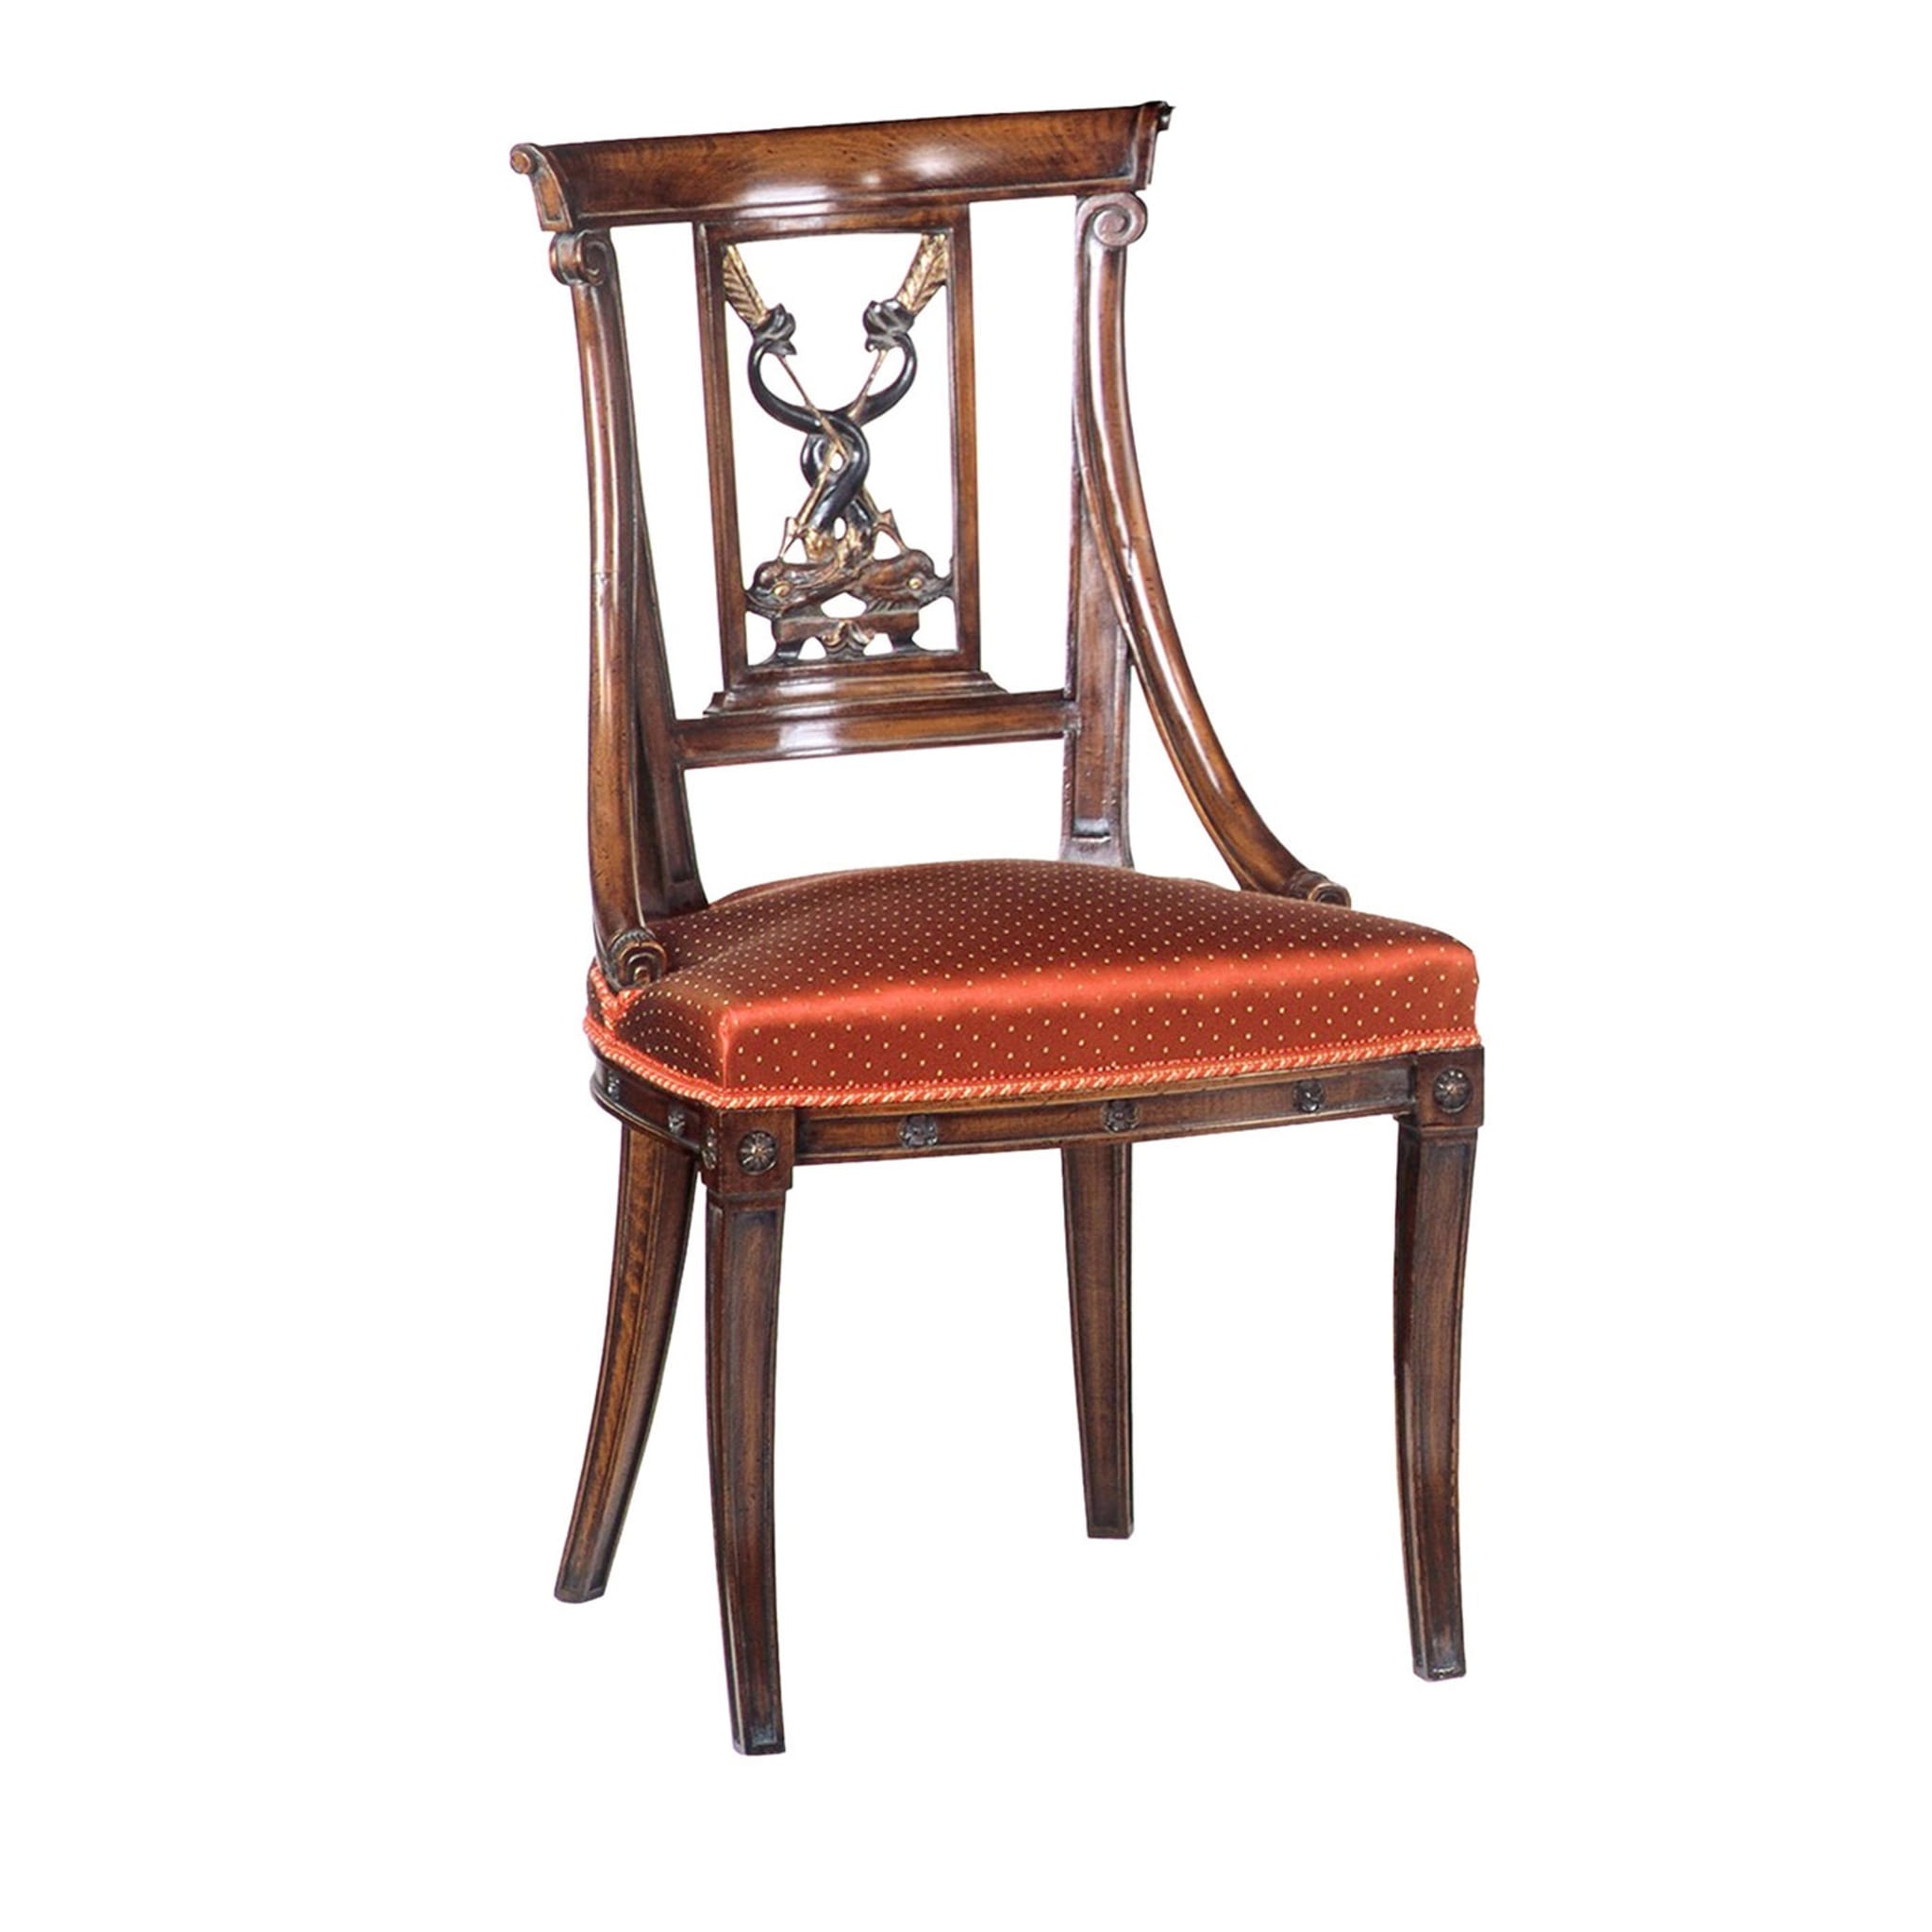 French Empire-Style Red-Cushion Chair - Main view